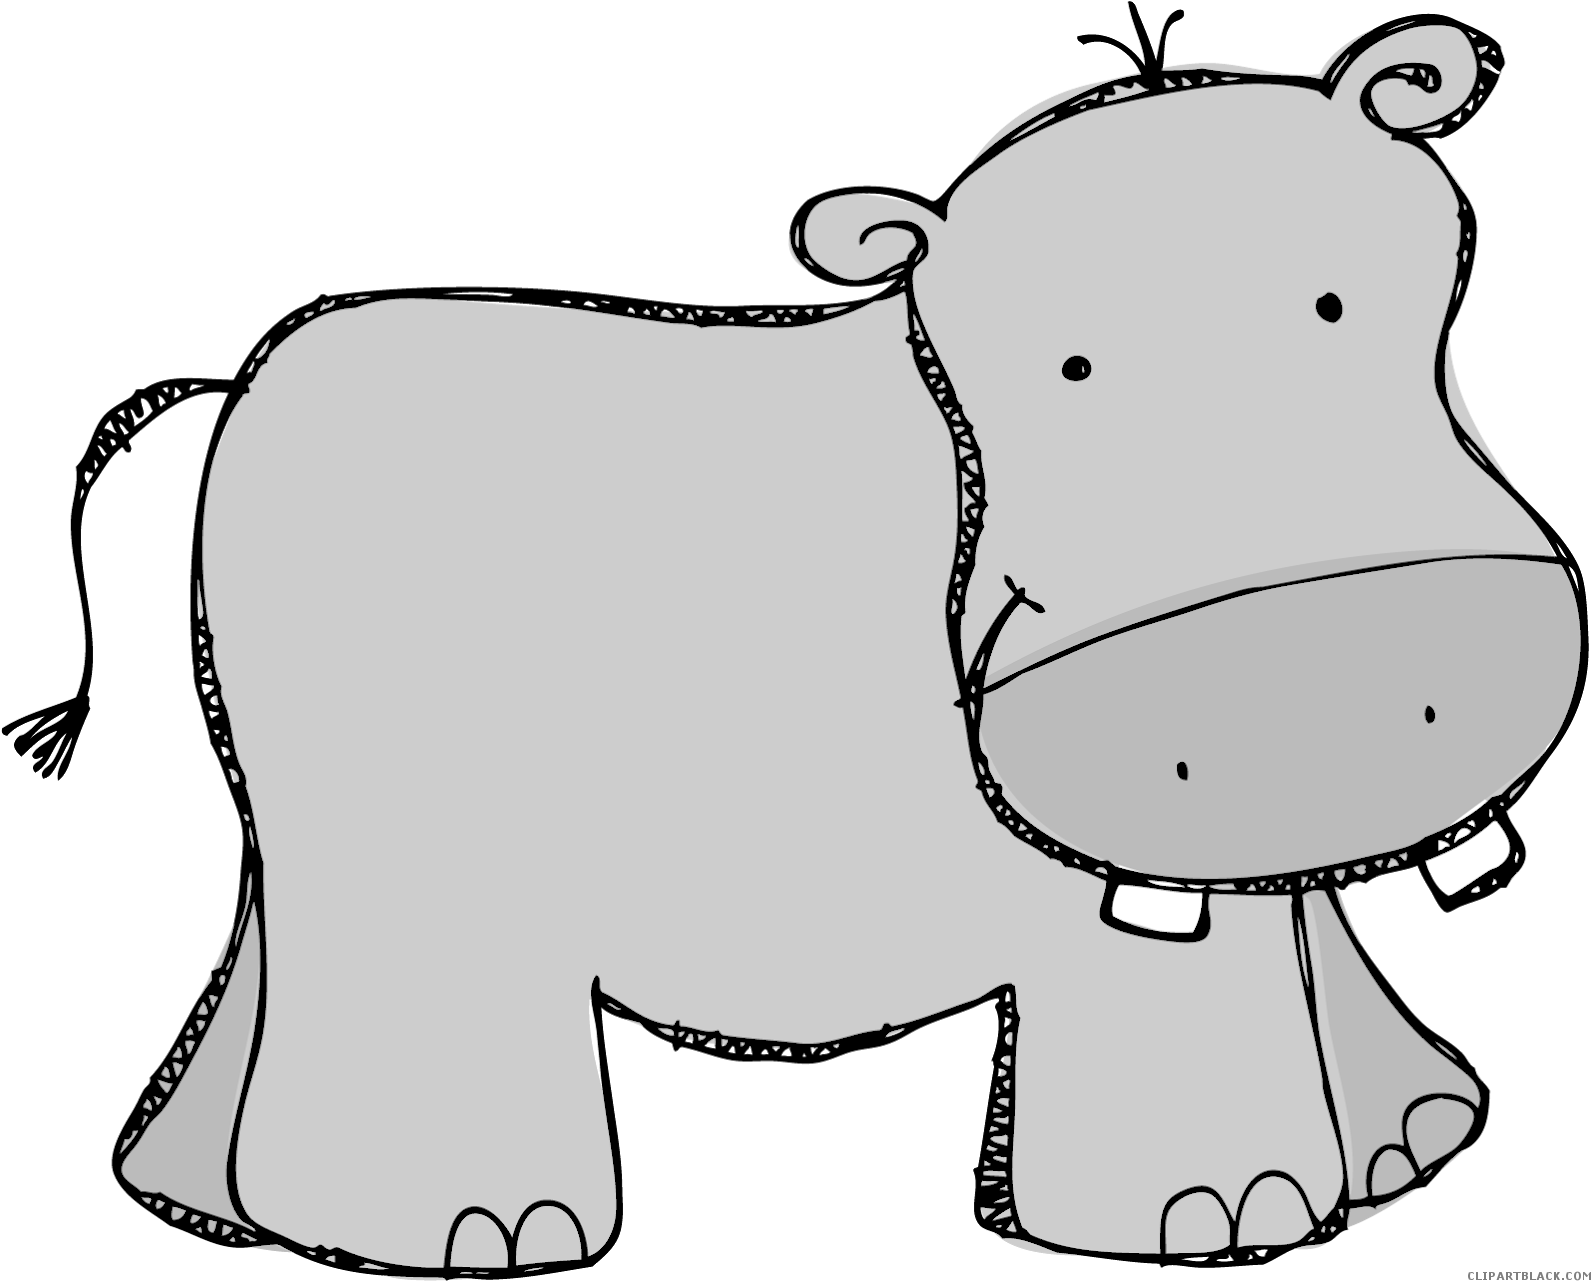 Hippo Animal Free Black White Clipart Images Clipartblack - Hippo Clipart (1600x1289)